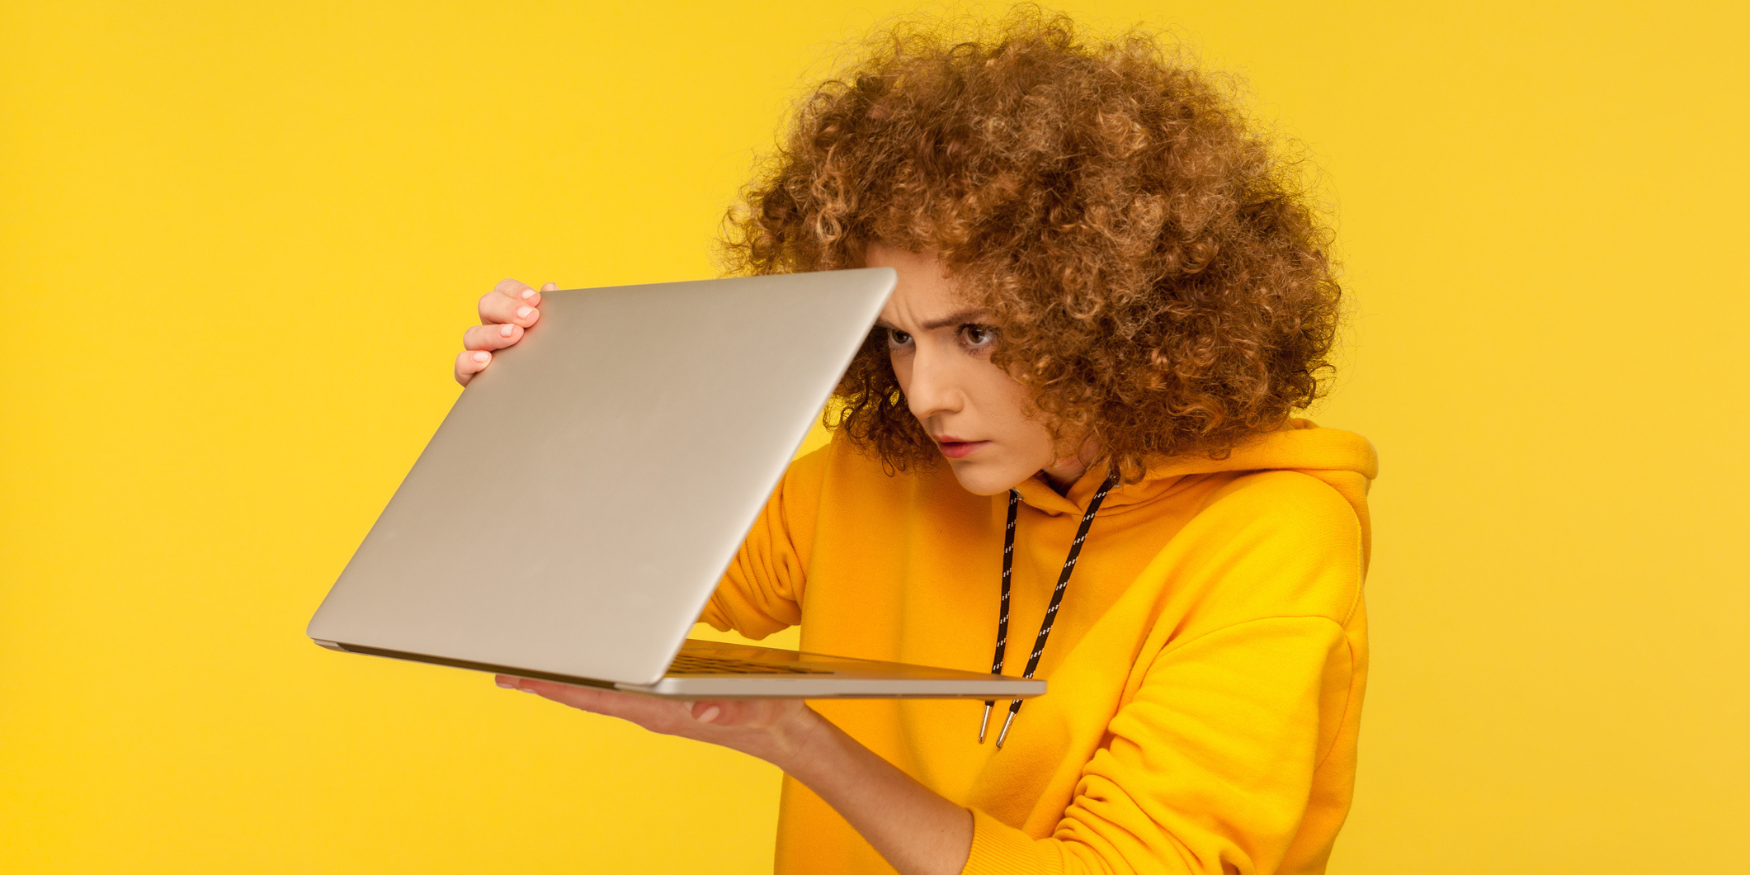 Woman in a yellow shirt carefully opening a laptop